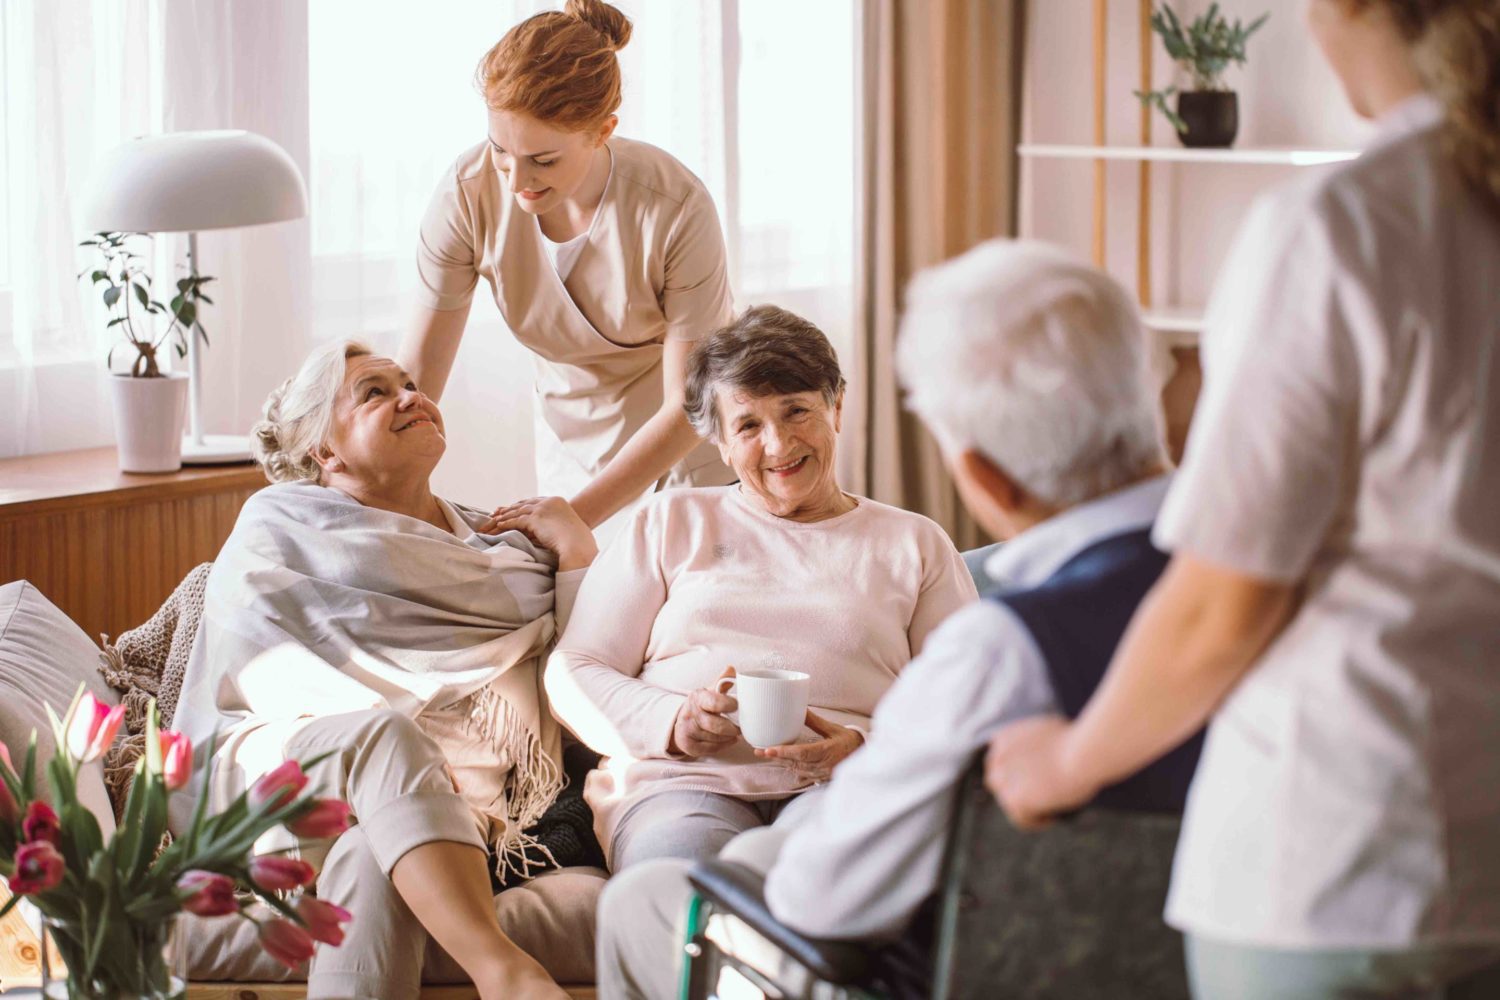 13-questiions-to-ask-before-choosing-a-nursing-home